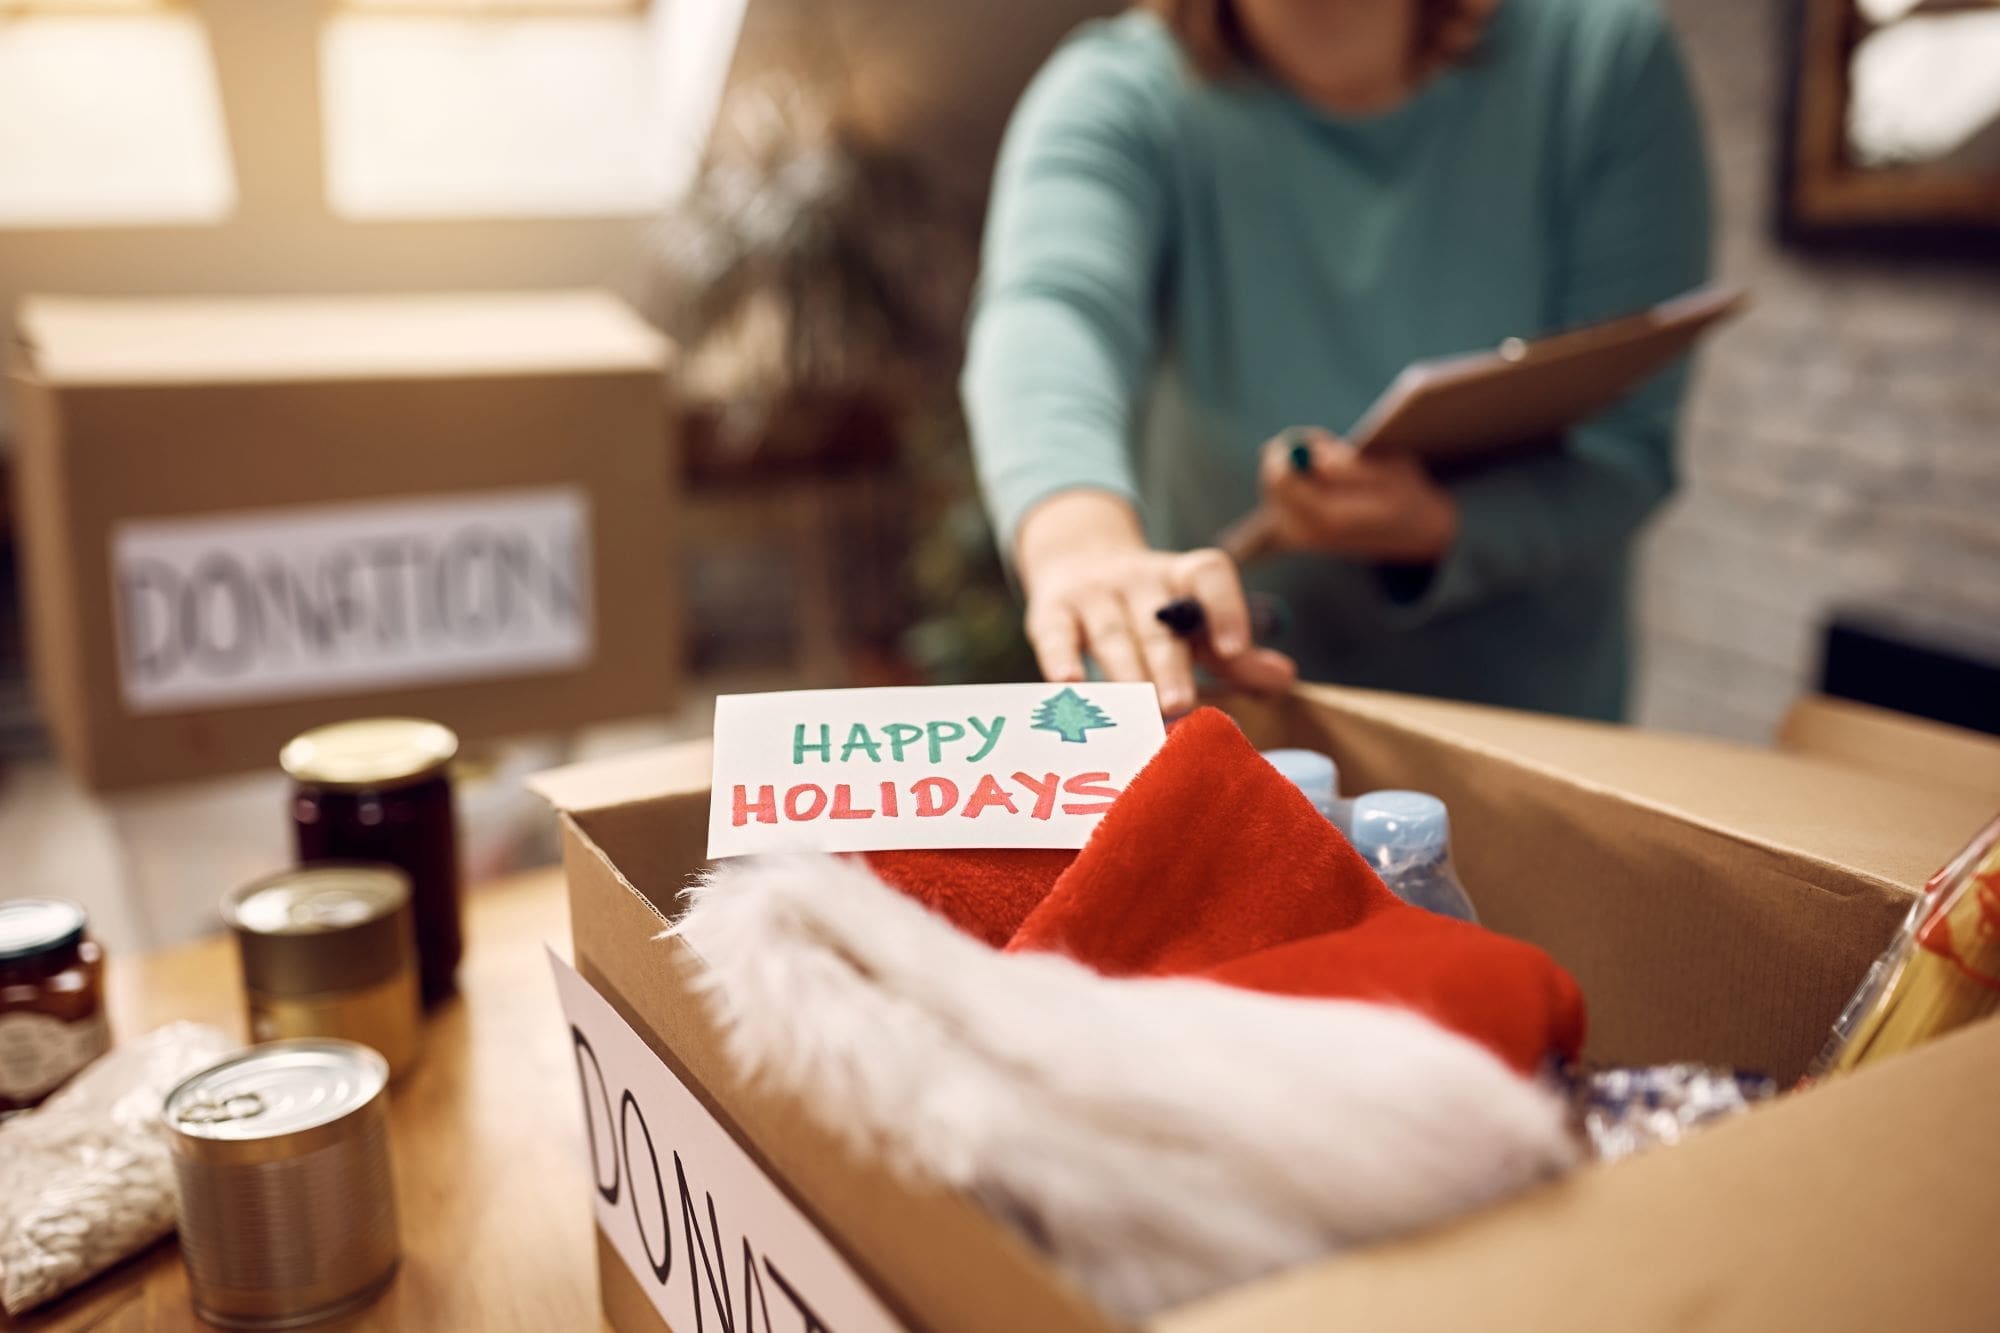 Post Holiday Decluttering: 5 Tips to Reorganize Your Space